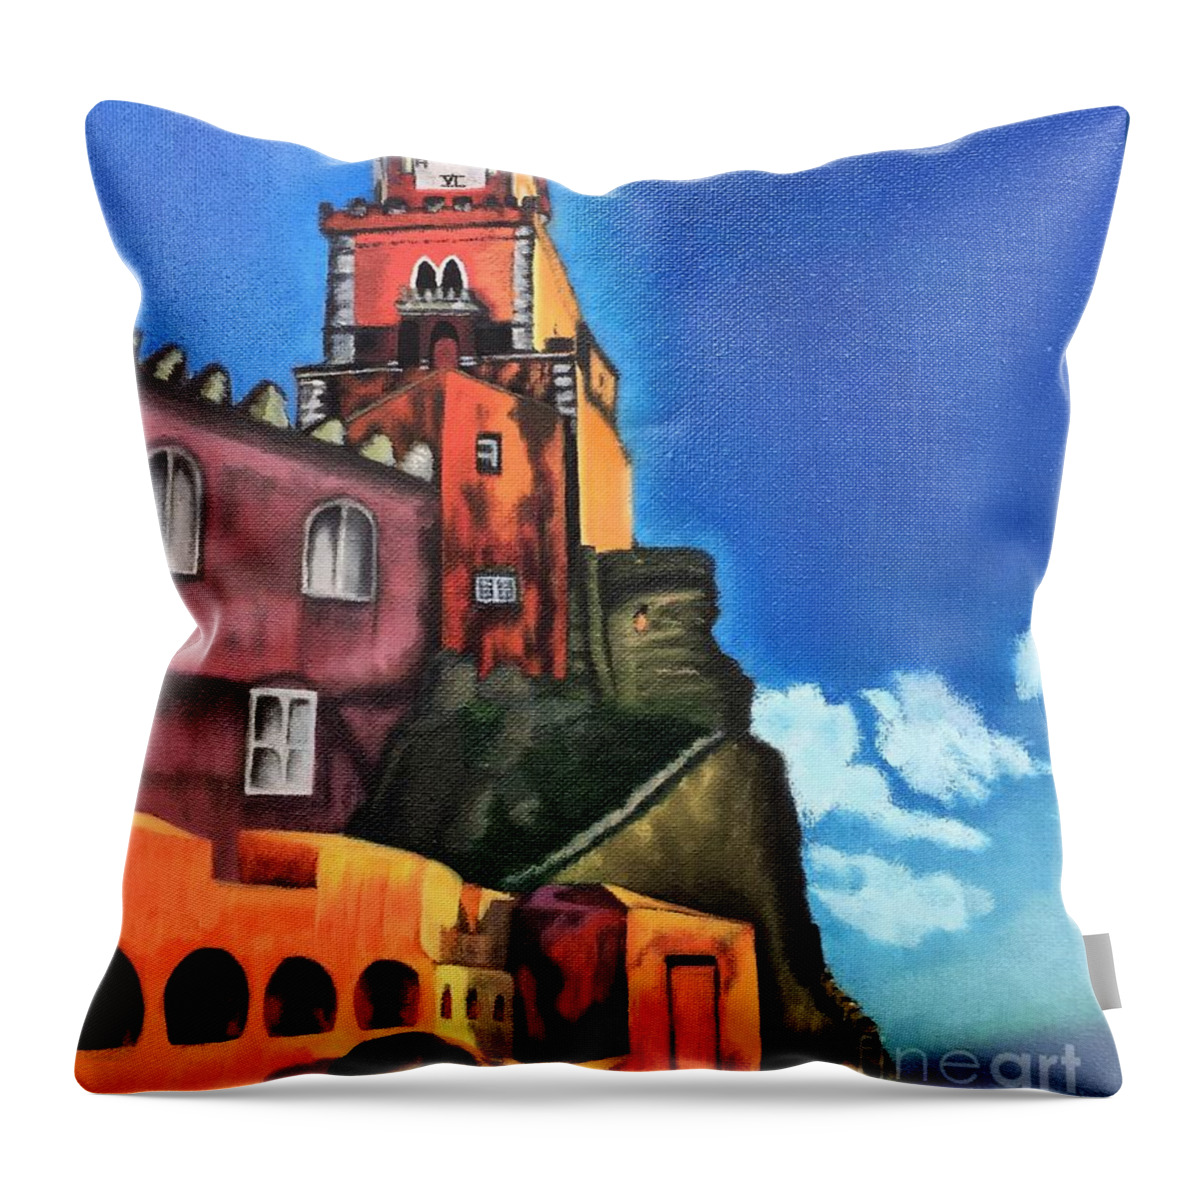 Church Throw Pillow featuring the painting Take Me to Church by Jennefer Chaudhry